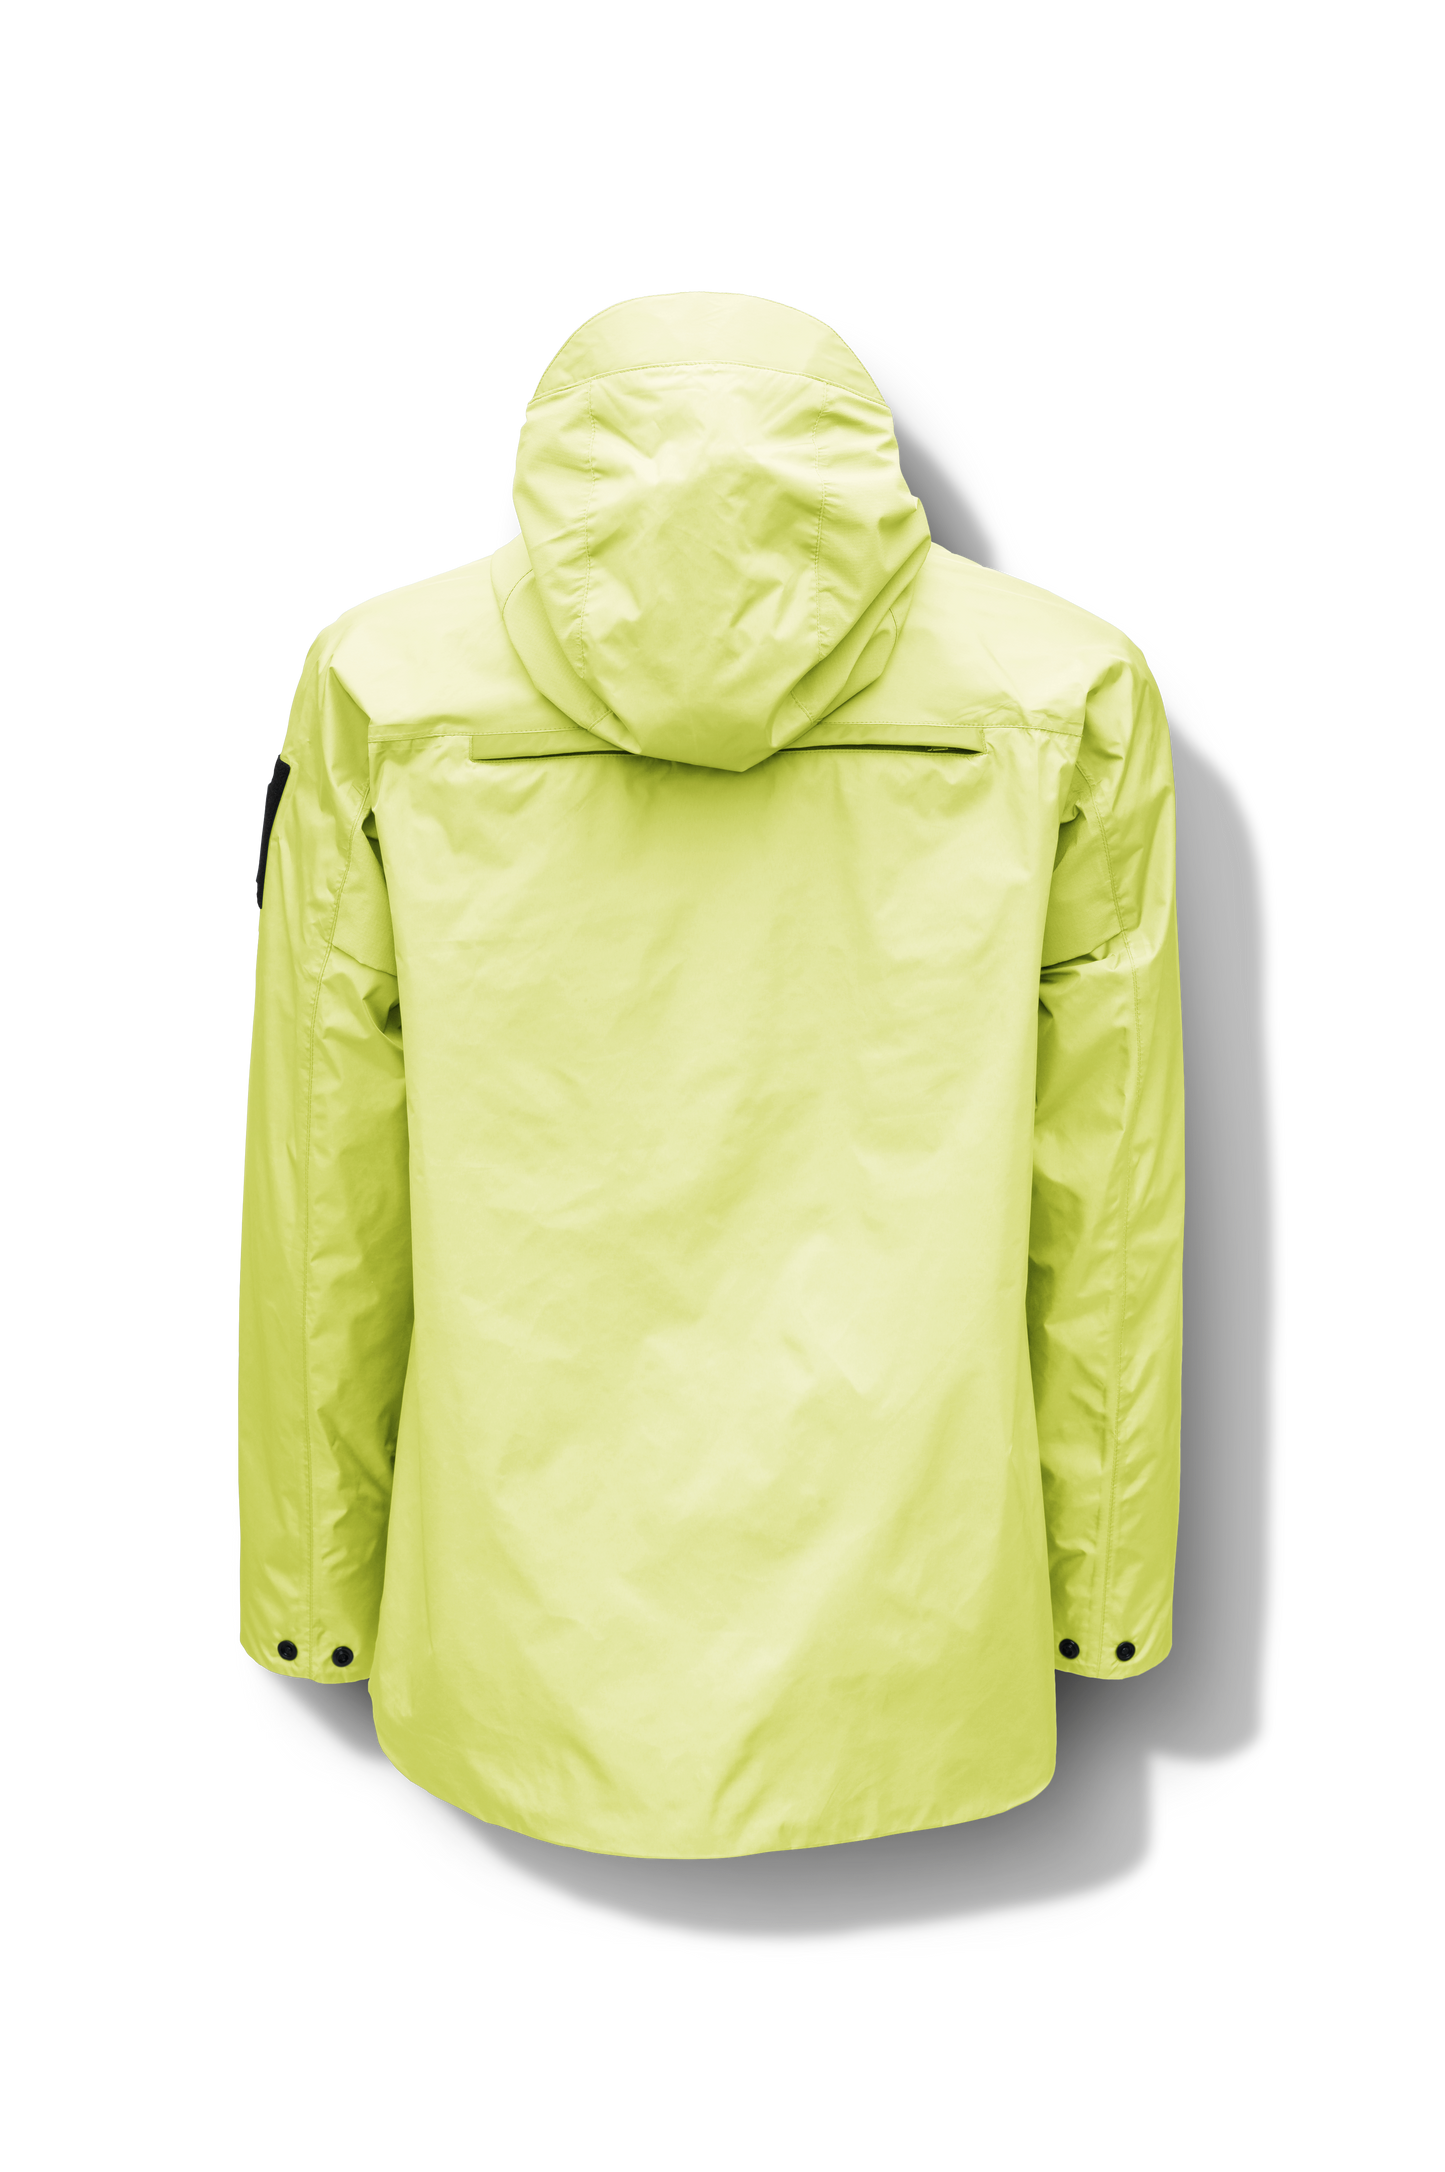 Mission Men's Performance Rain Shell Jacket in hip length, non-removable hood with adjustable toggle, two-way waterproof zipper, flap closure waist pockets with additional side entry storage, zipper ventilation on back, passive underarm ventilation, and breathable mesh lining, in Sulphur Spring